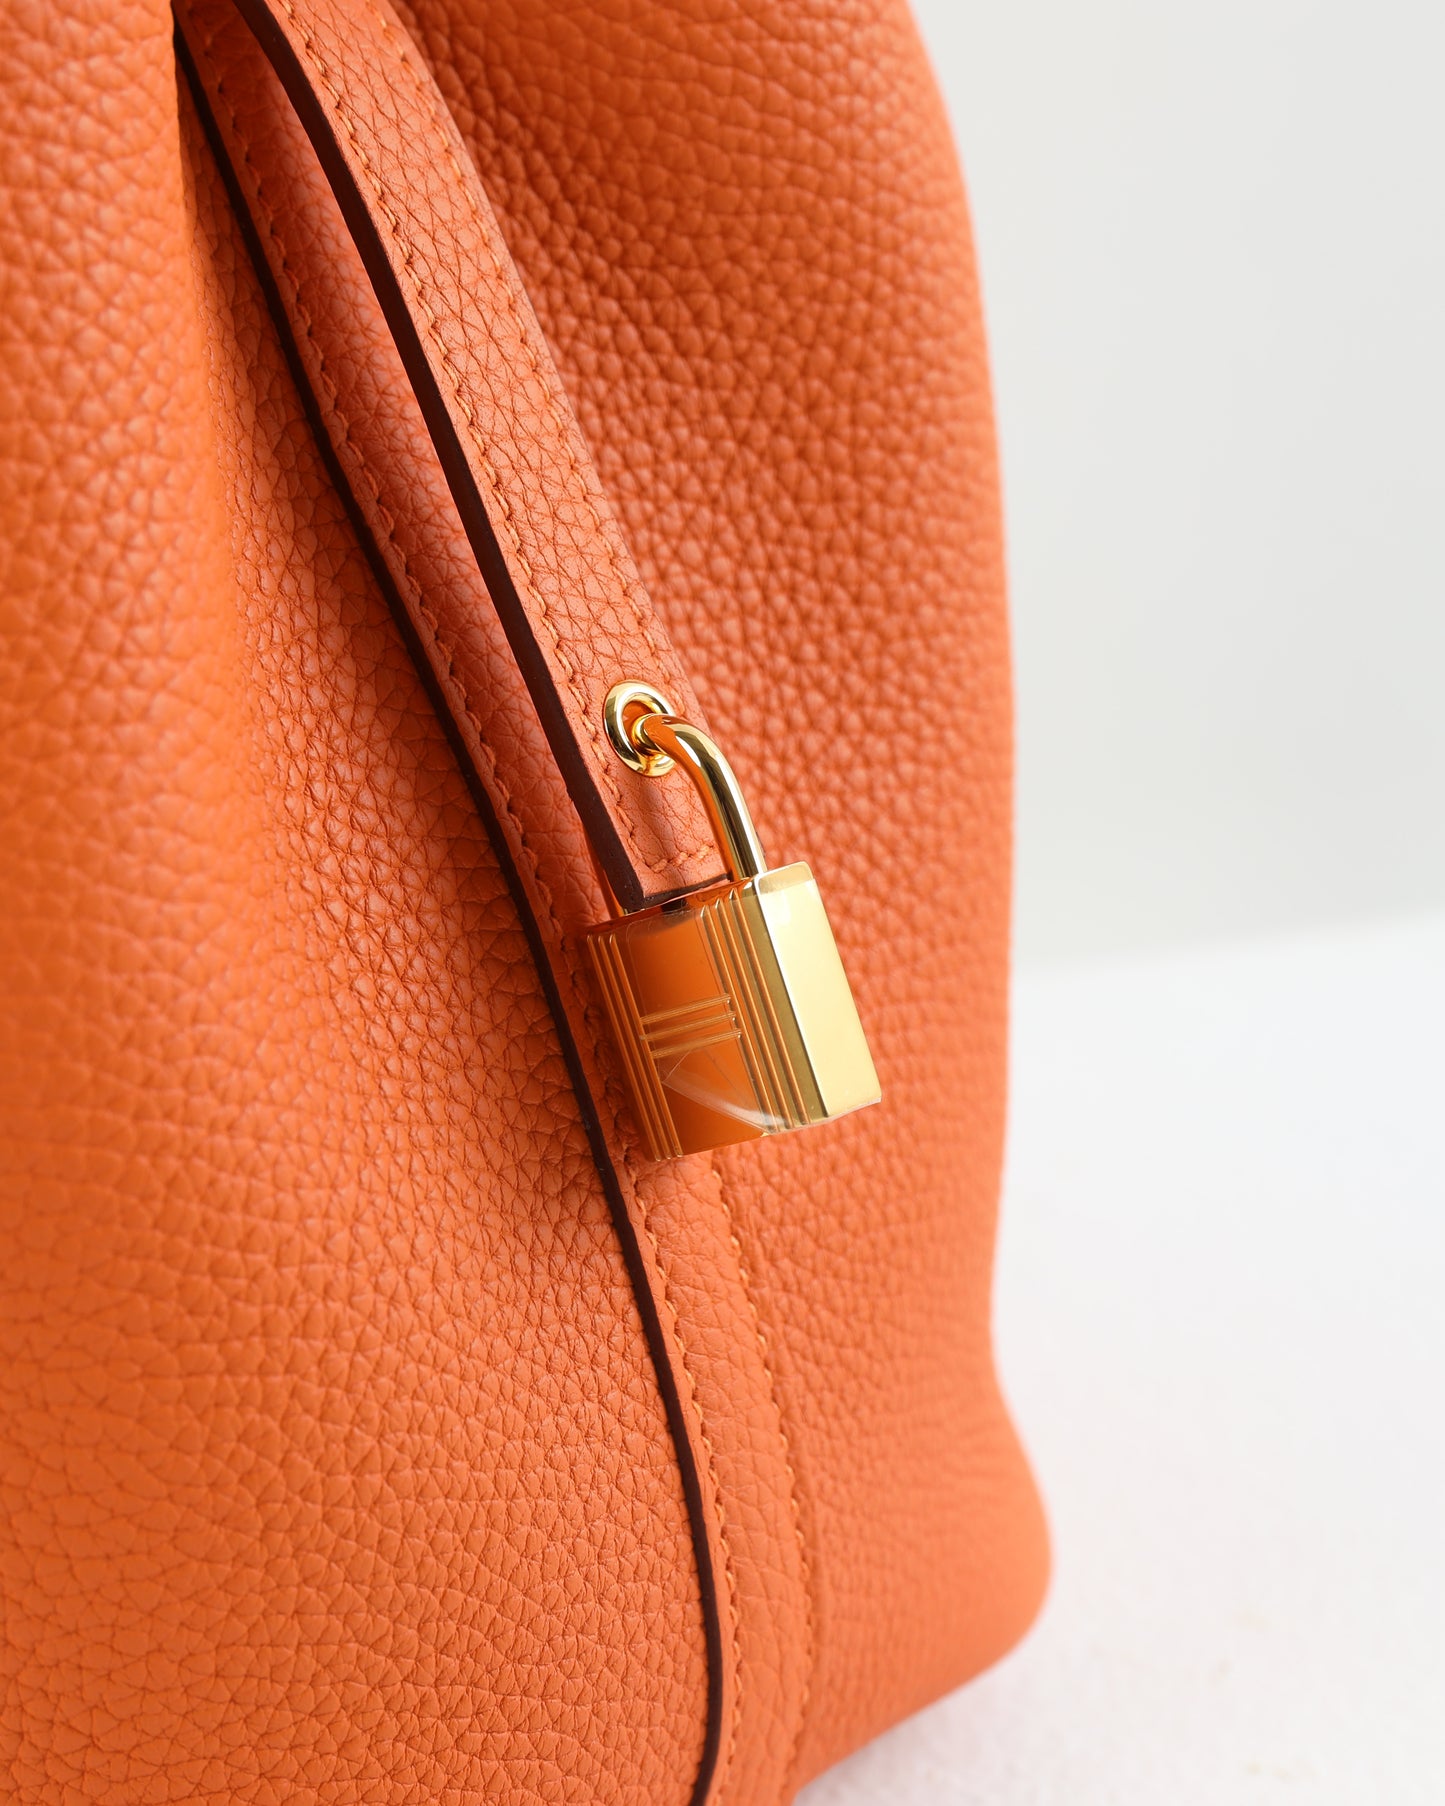 Picotin 18 Orange in Clemence Leather with Gold Hardware